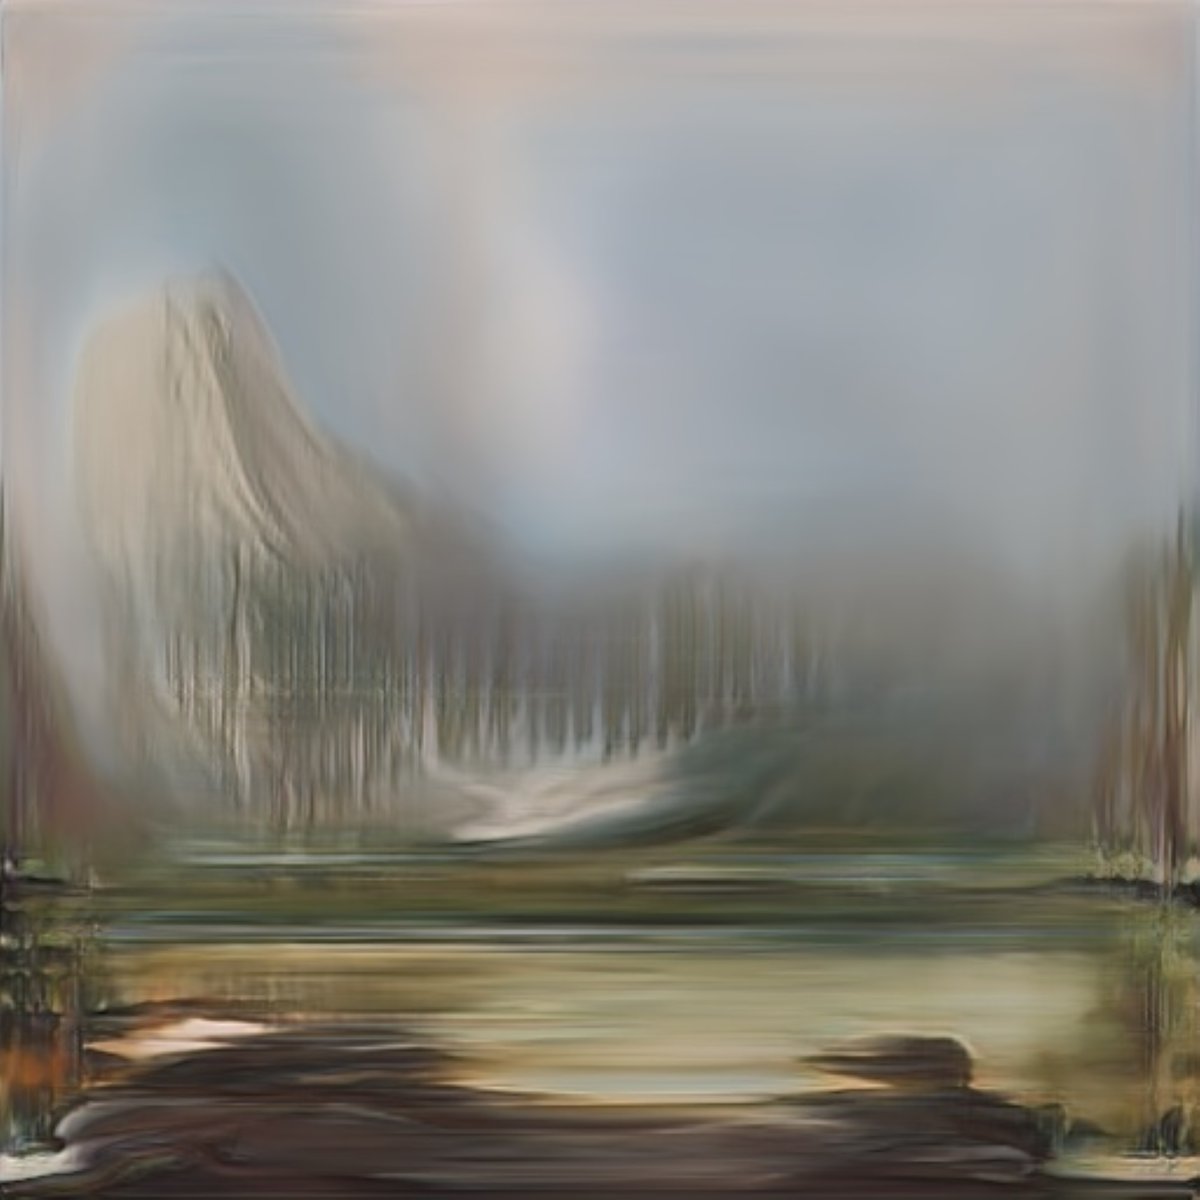 Towering Teton
From my 'Dreamscapes' collection. 
See them all on Foundation:
foundation.app/@rickcrites?ta…

#SurrealArt #AbstractArt #ImpressionistArt #NFTArt